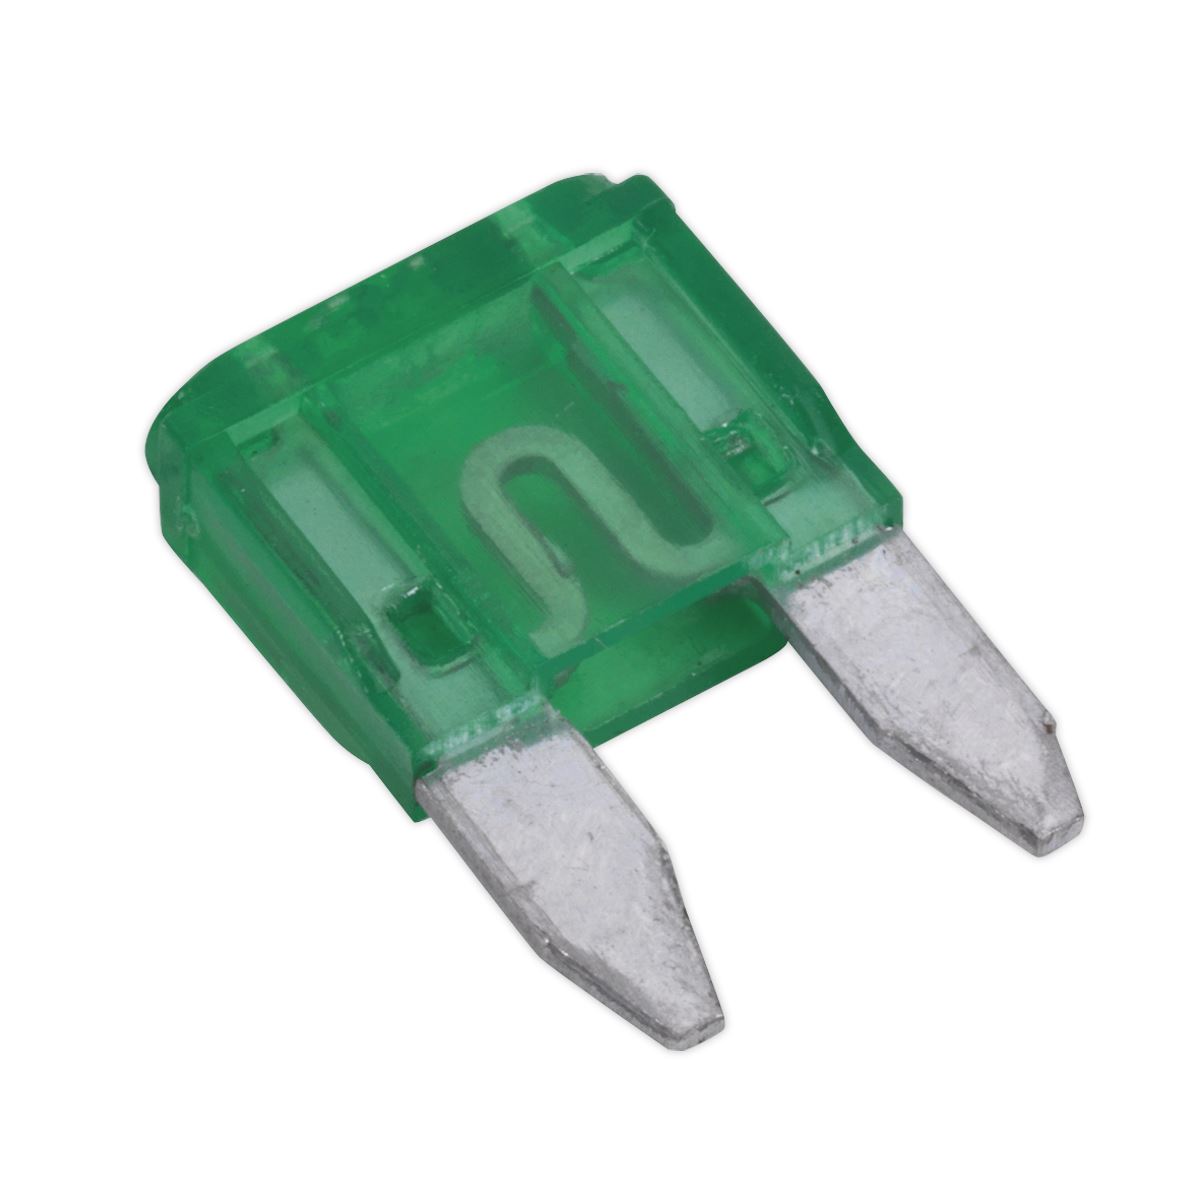 Sealey Automotive MINI Blade Fuse 30A Pack of 50